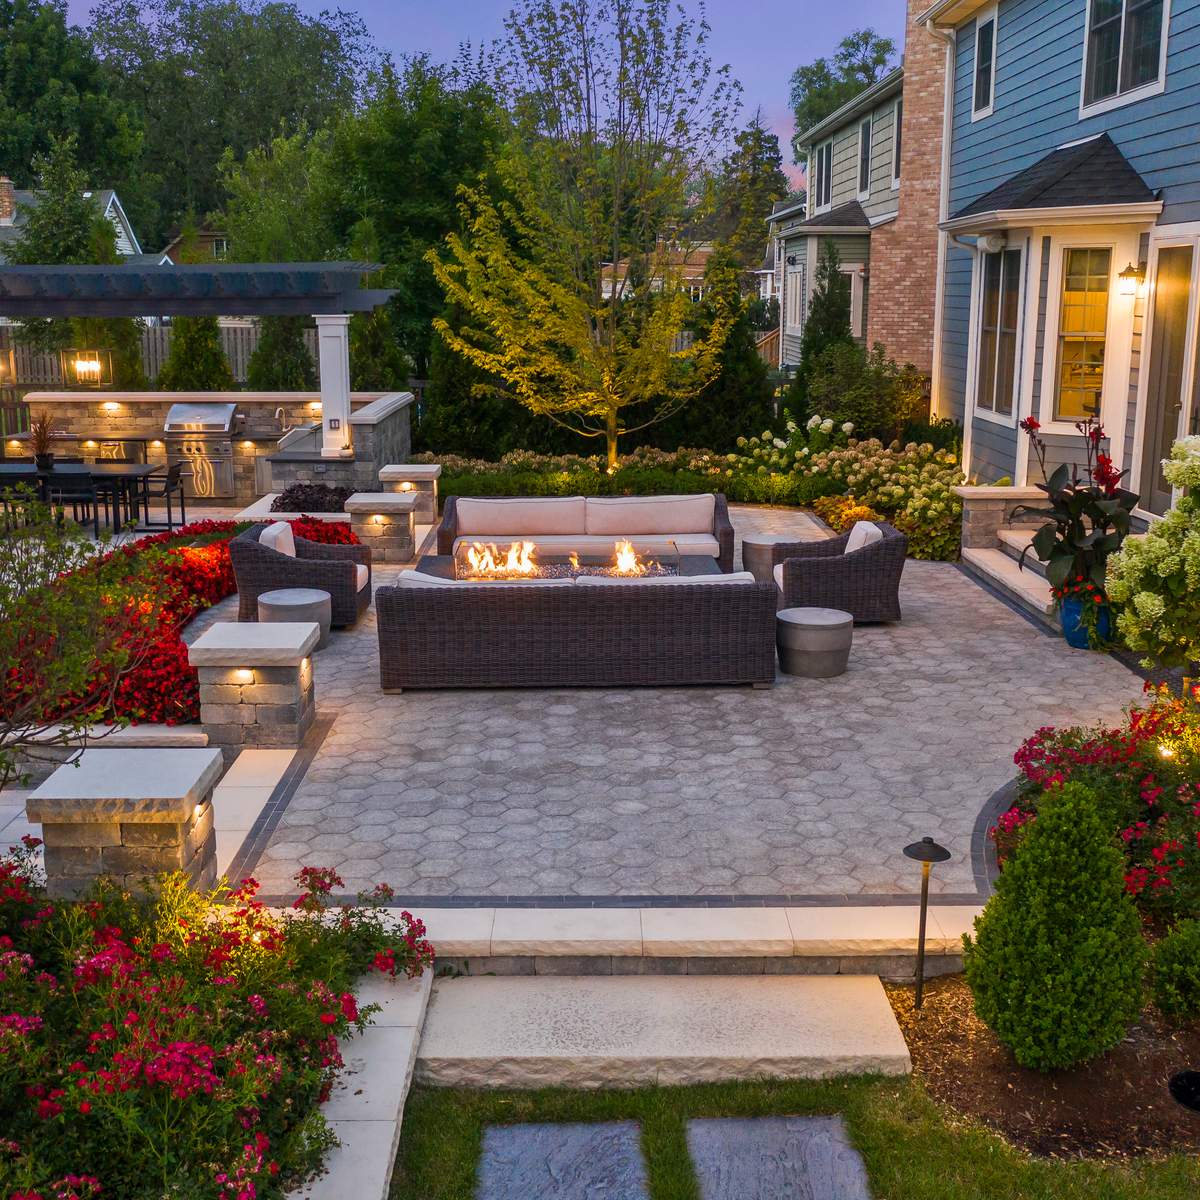 A backyard with a fire pit and seating area made of concrete pavers.